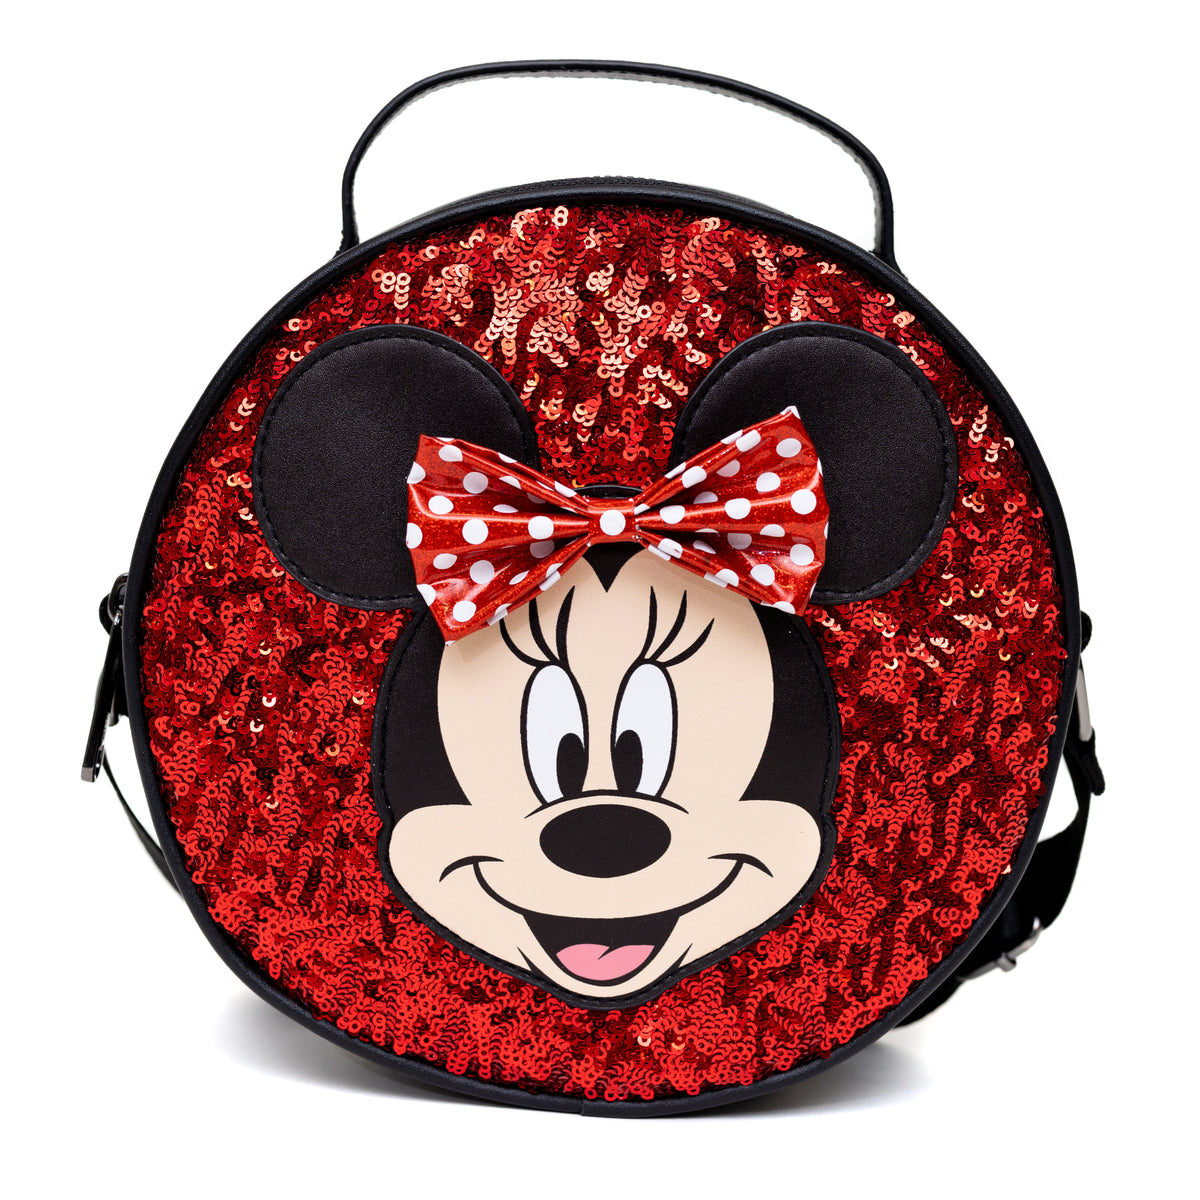 Disney Minnie Loves Mickey Mouse Loungefly Embossed Tote With Bag Red